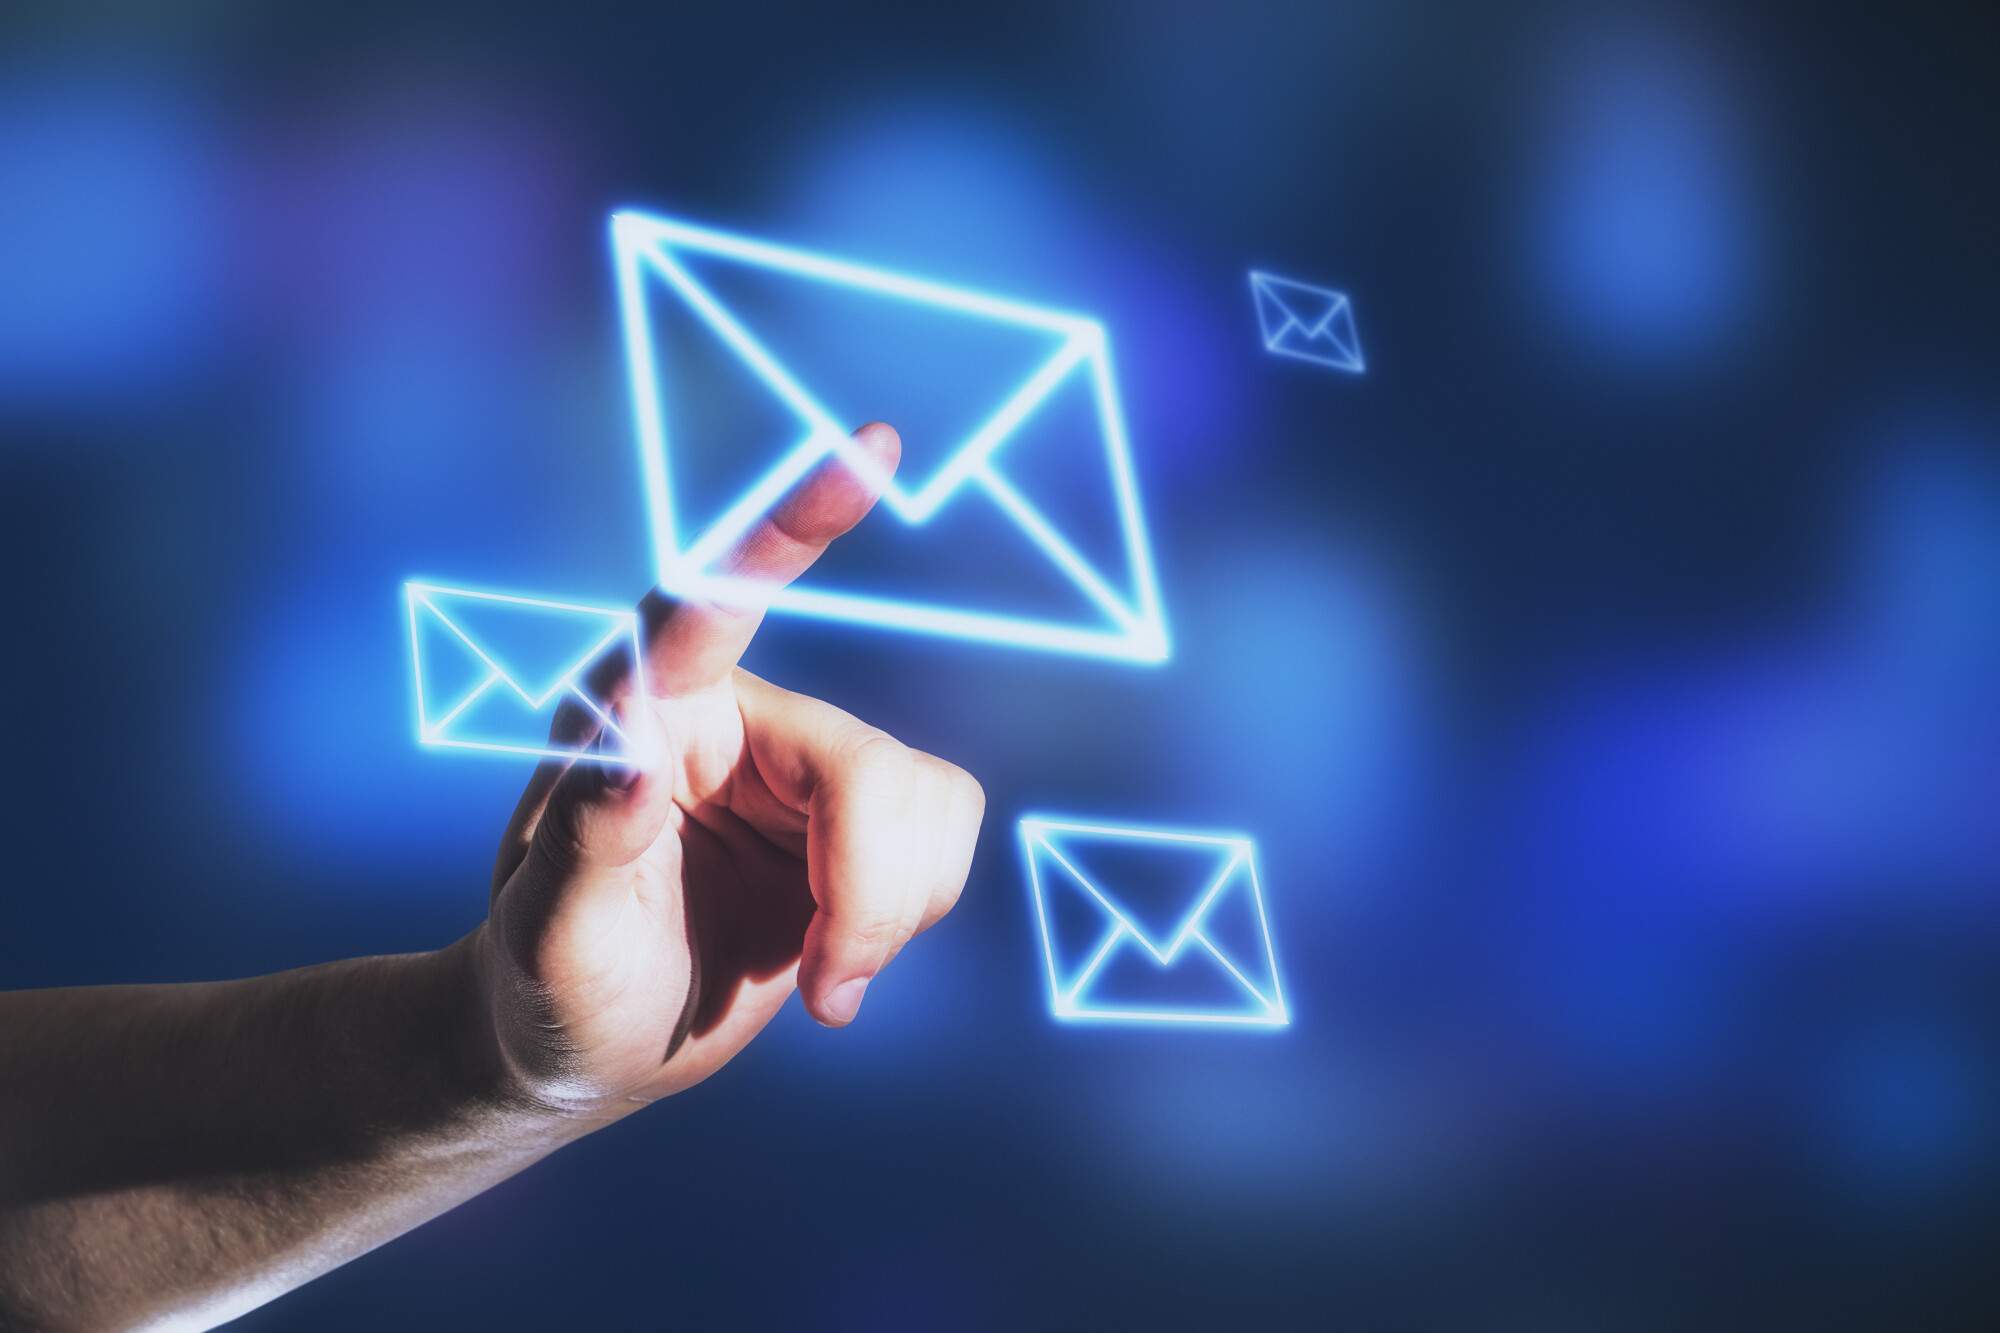 7 Benefits of Email Marketing